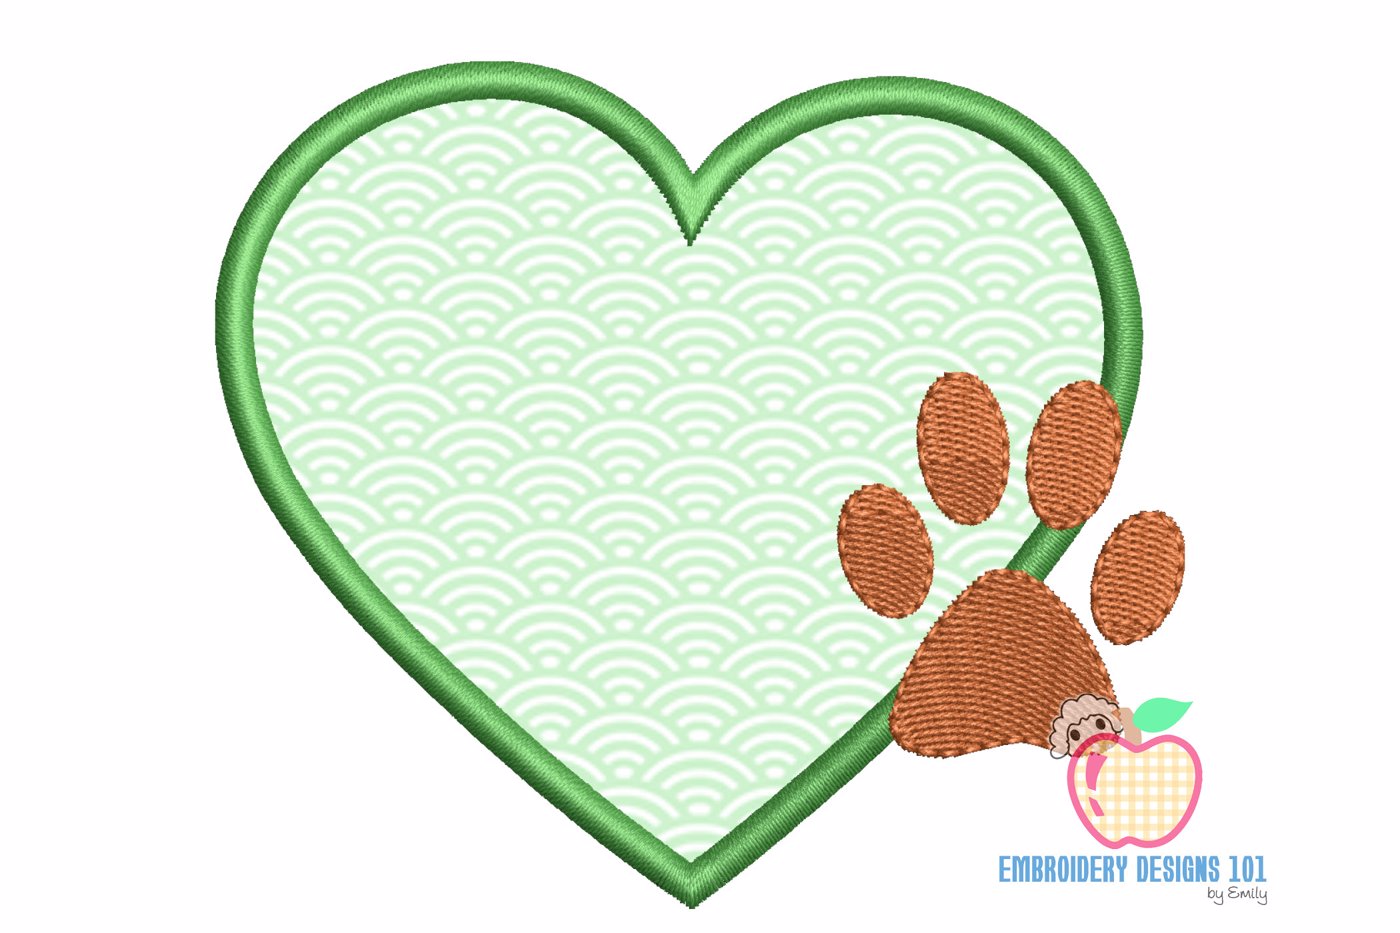 Design Of Heart With The Paw Footprint Applique